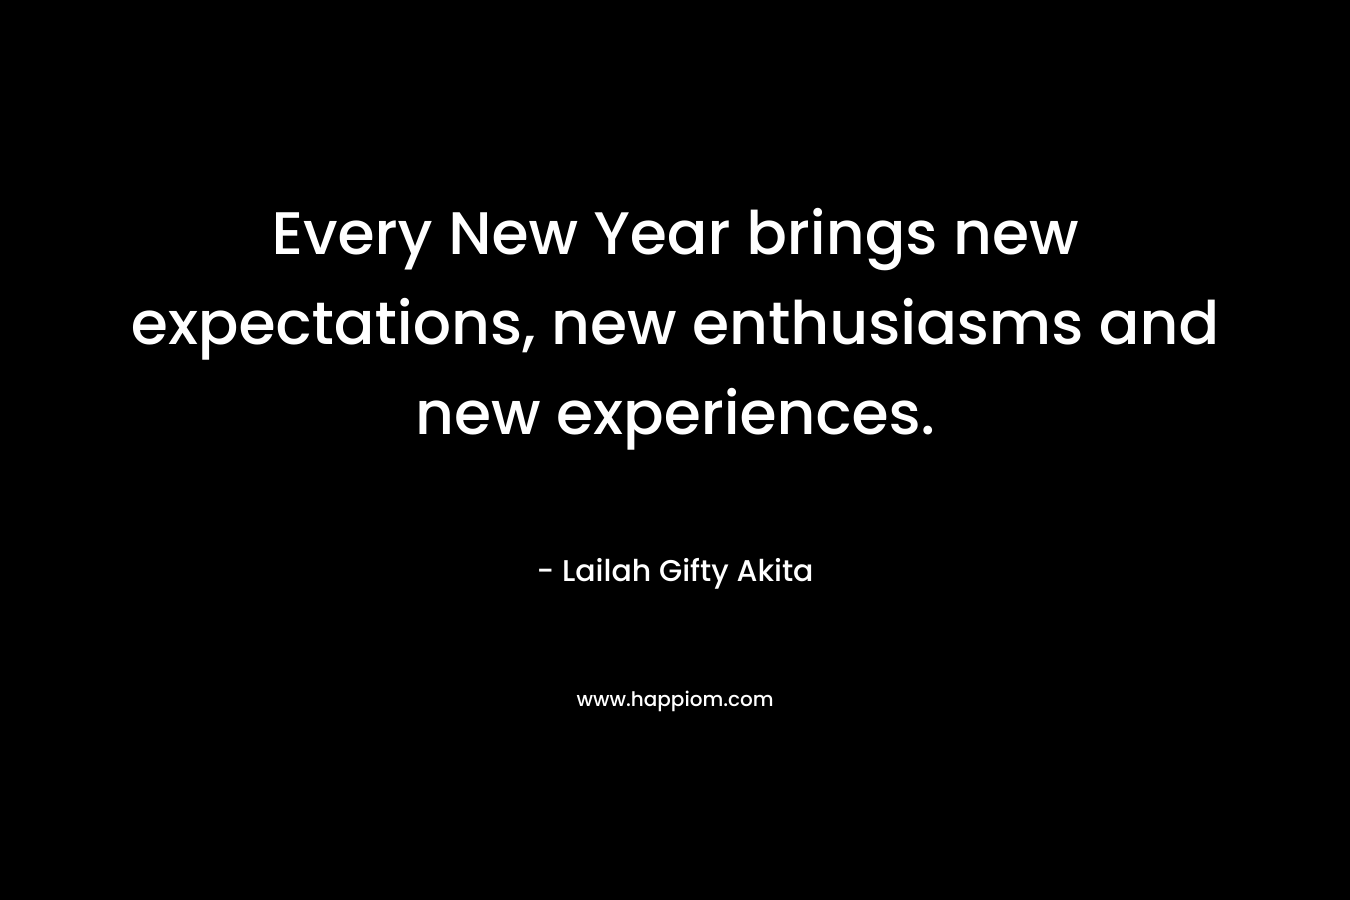 Every New Year brings new expectations, new enthusiasms and new experiences.